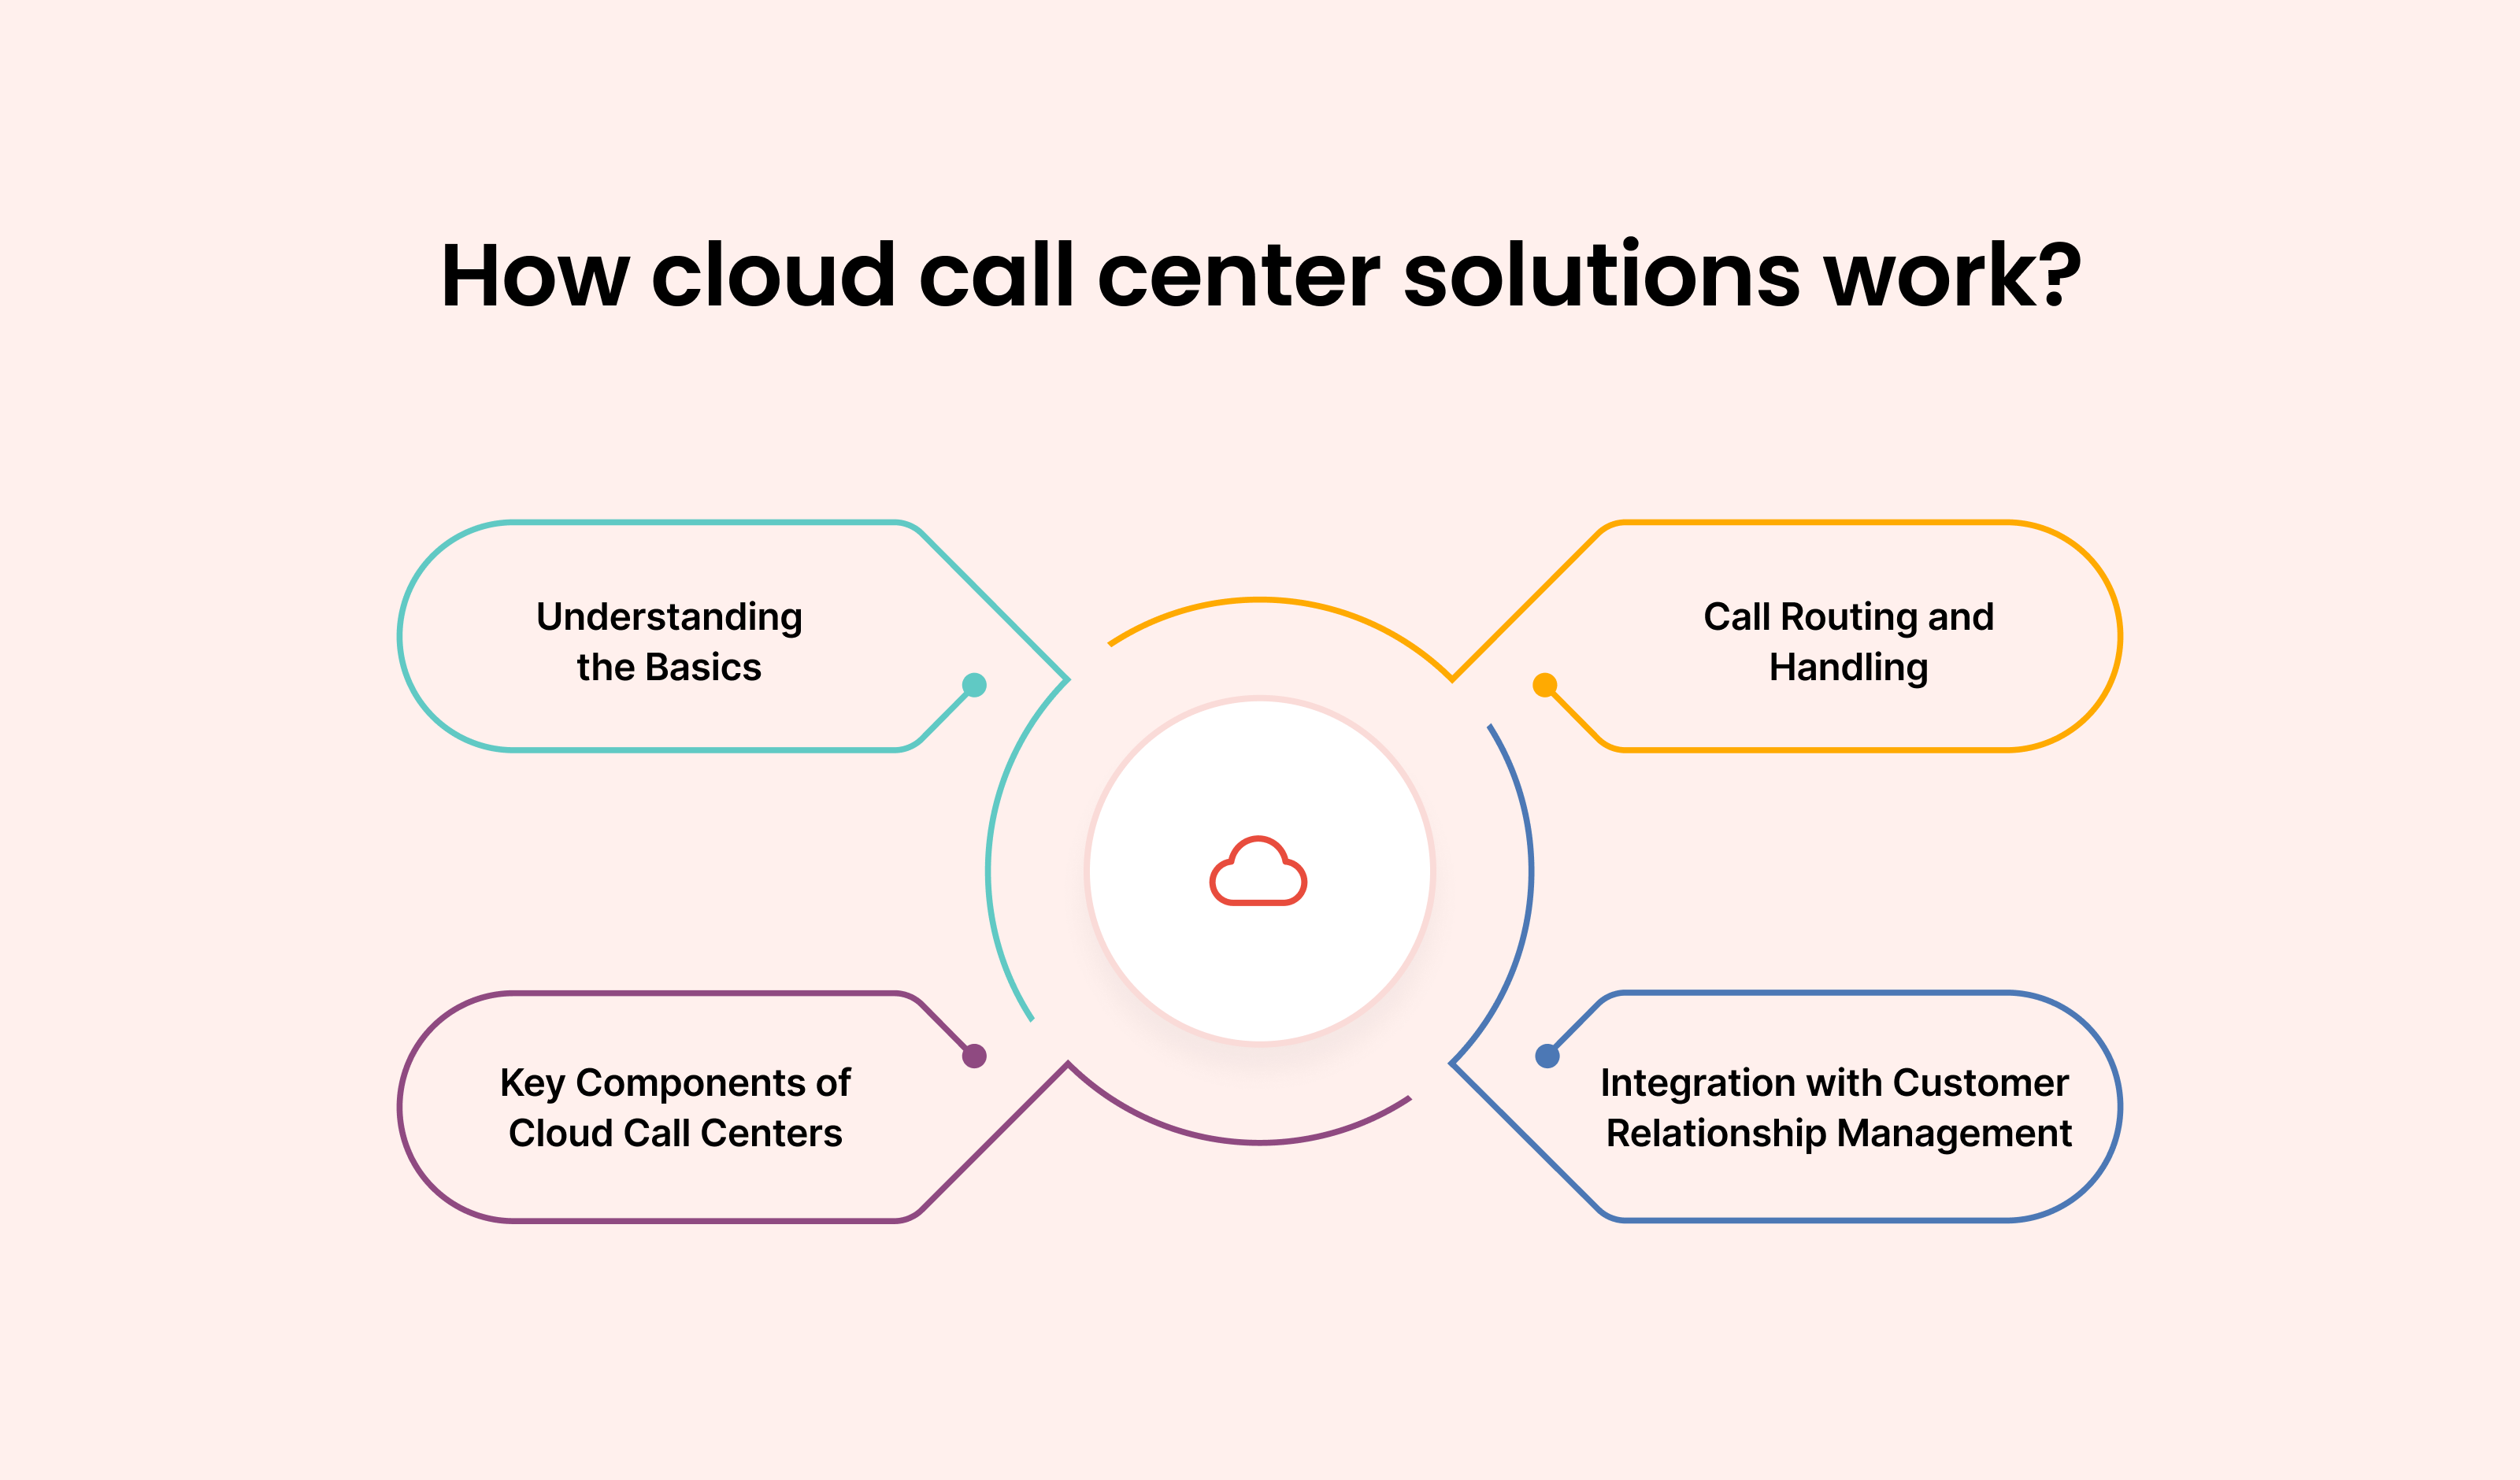 How Cloud Call Center Solutions Work: